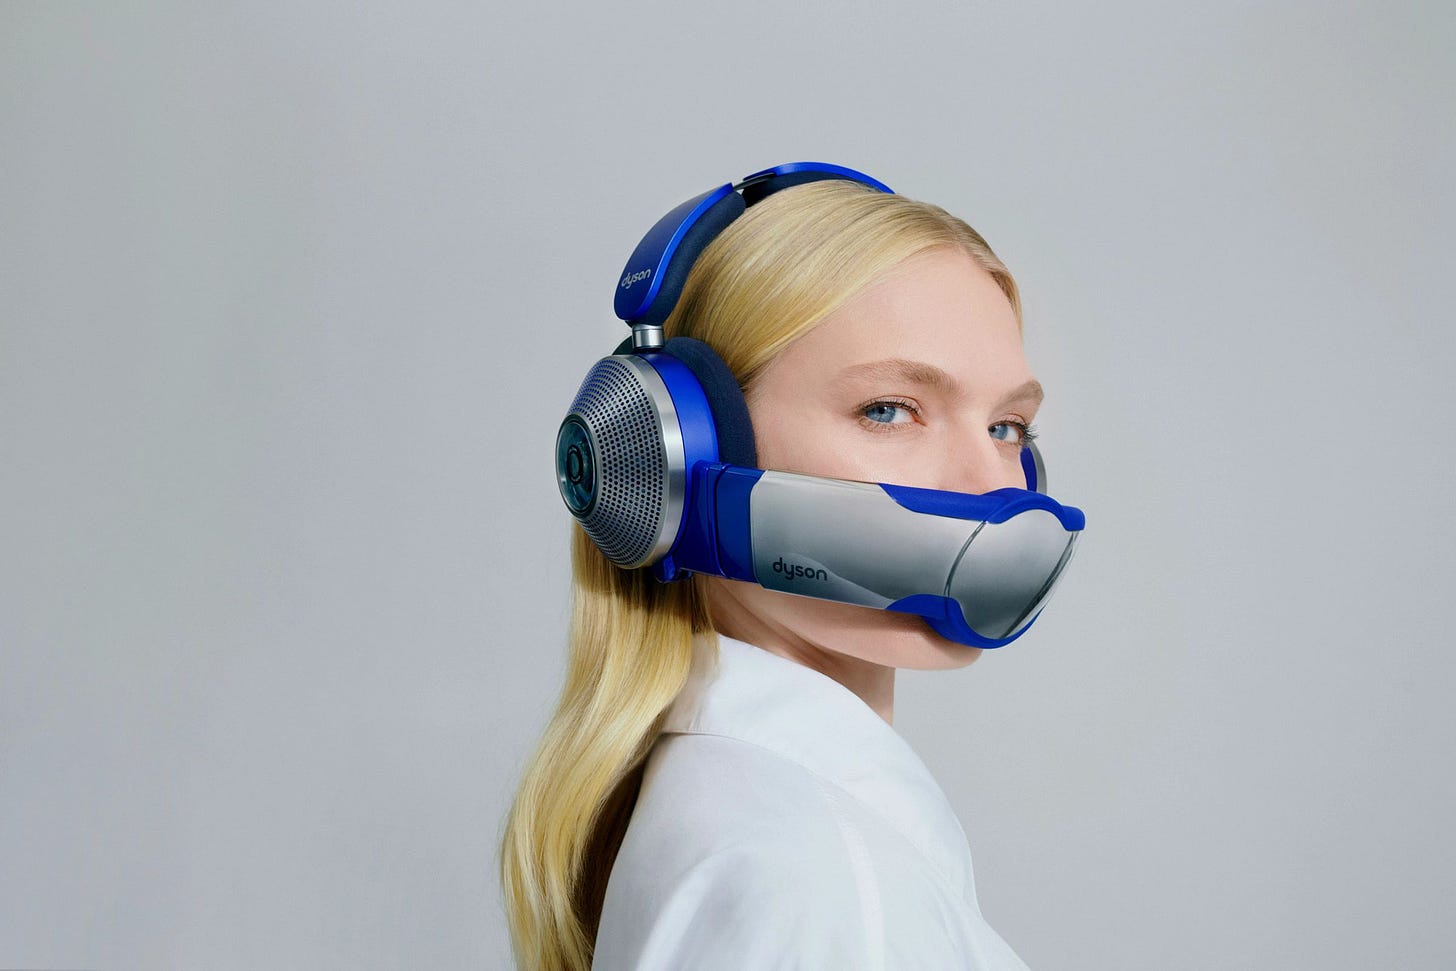 A woman looking over her shoulder. She is wearing the Dyson Zone with the air filtering visor attached, concealing her mouth.